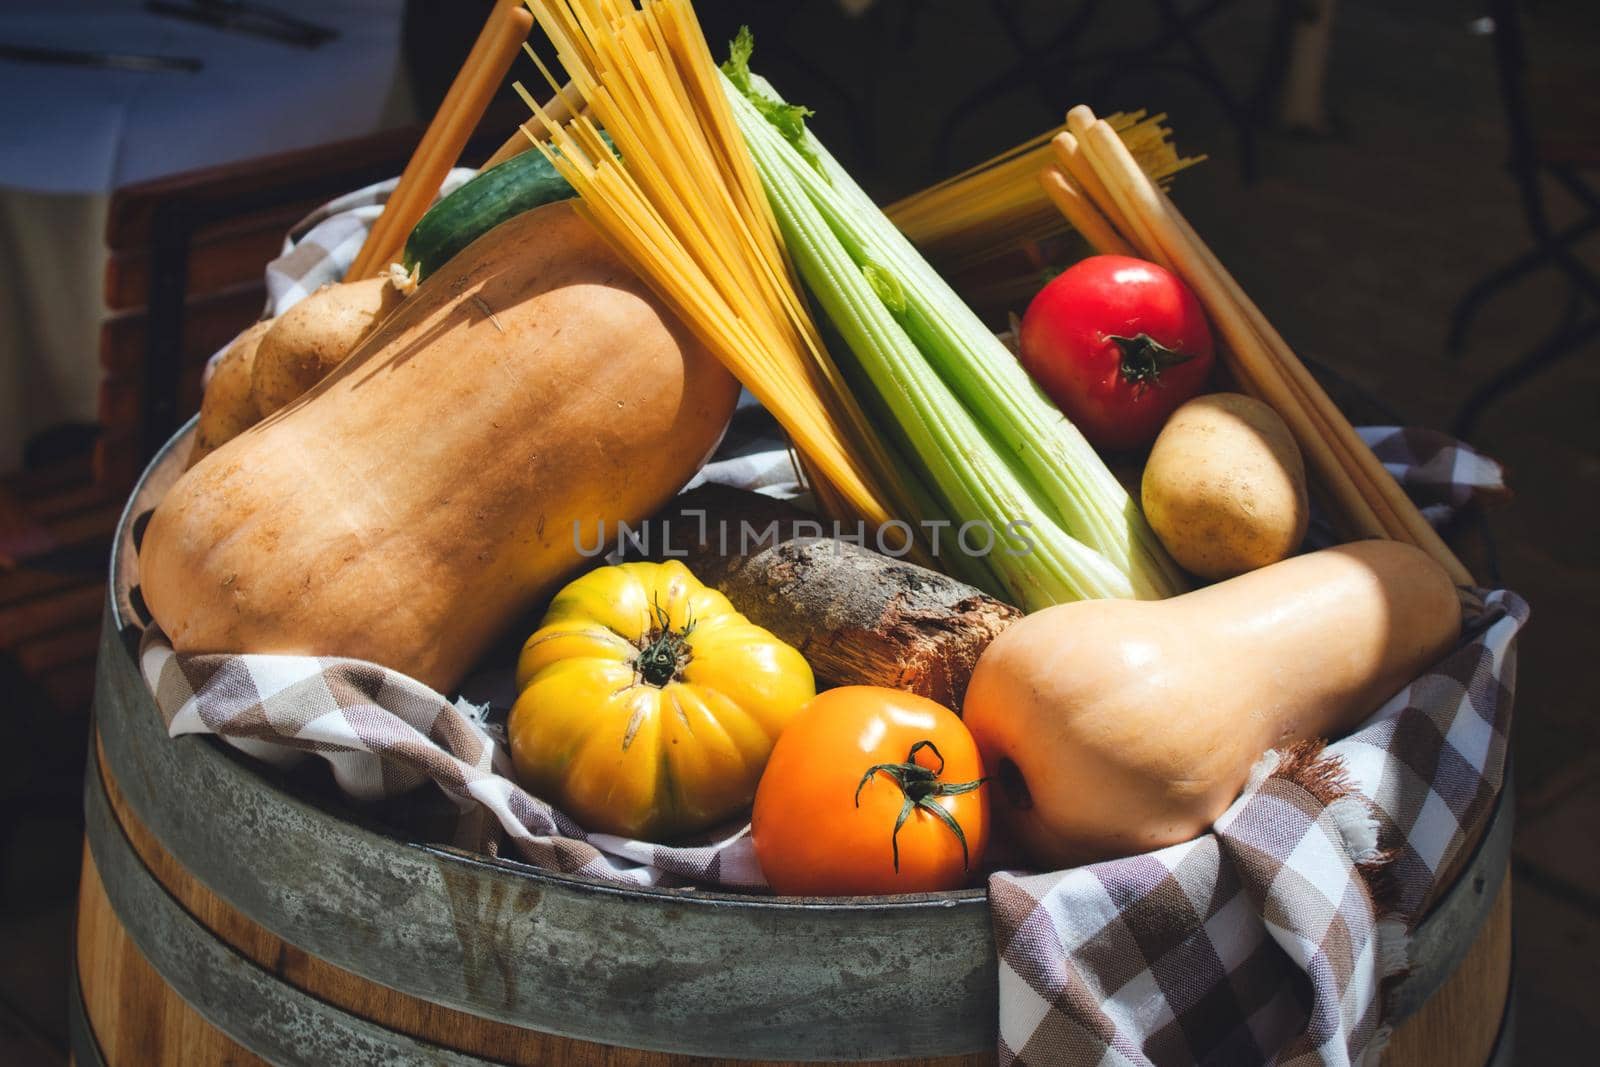 A selection of healthy winter vegetables on display on top of a barrel